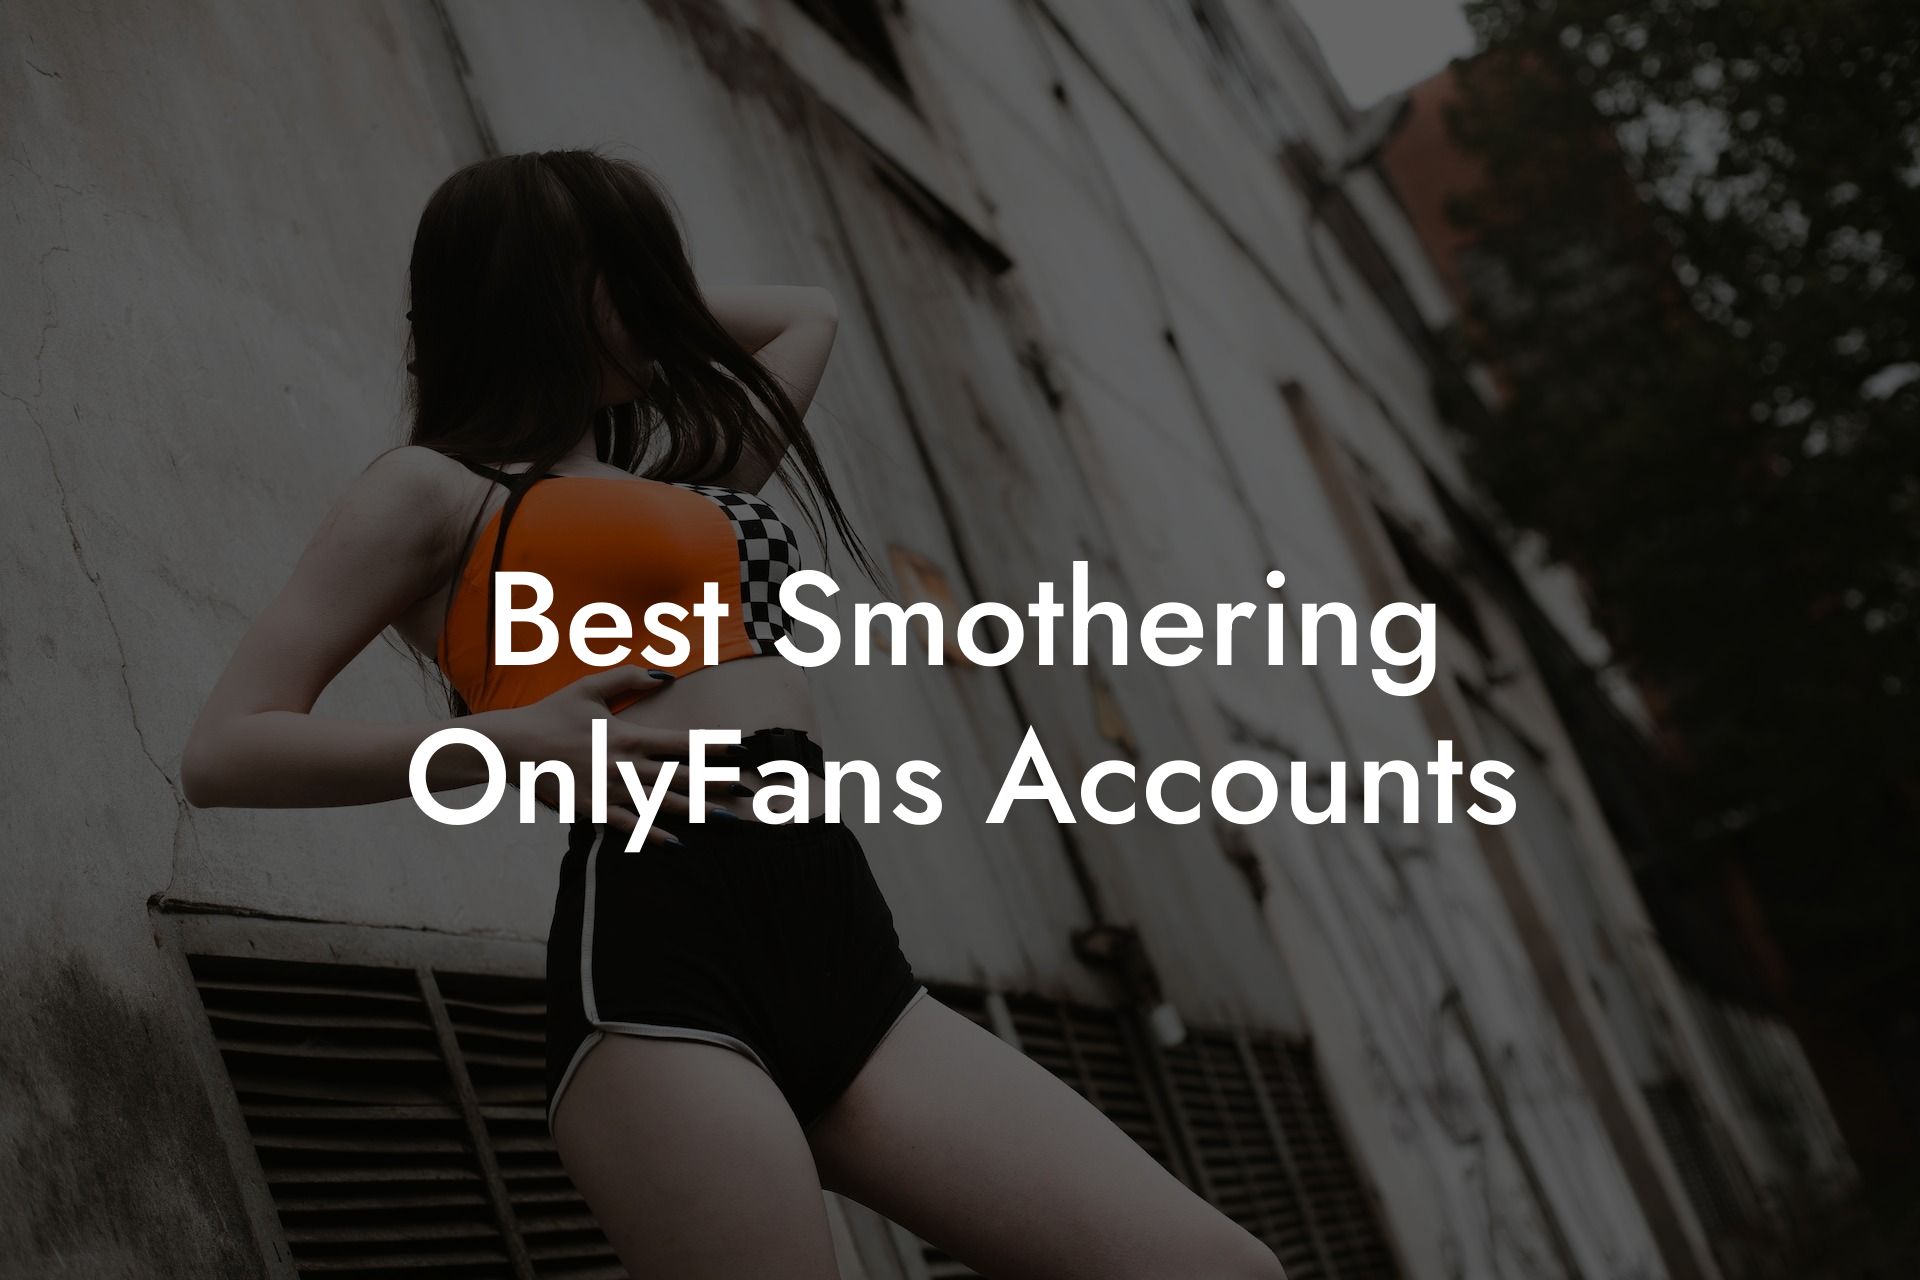 Best Smothering OnlyFans Accounts